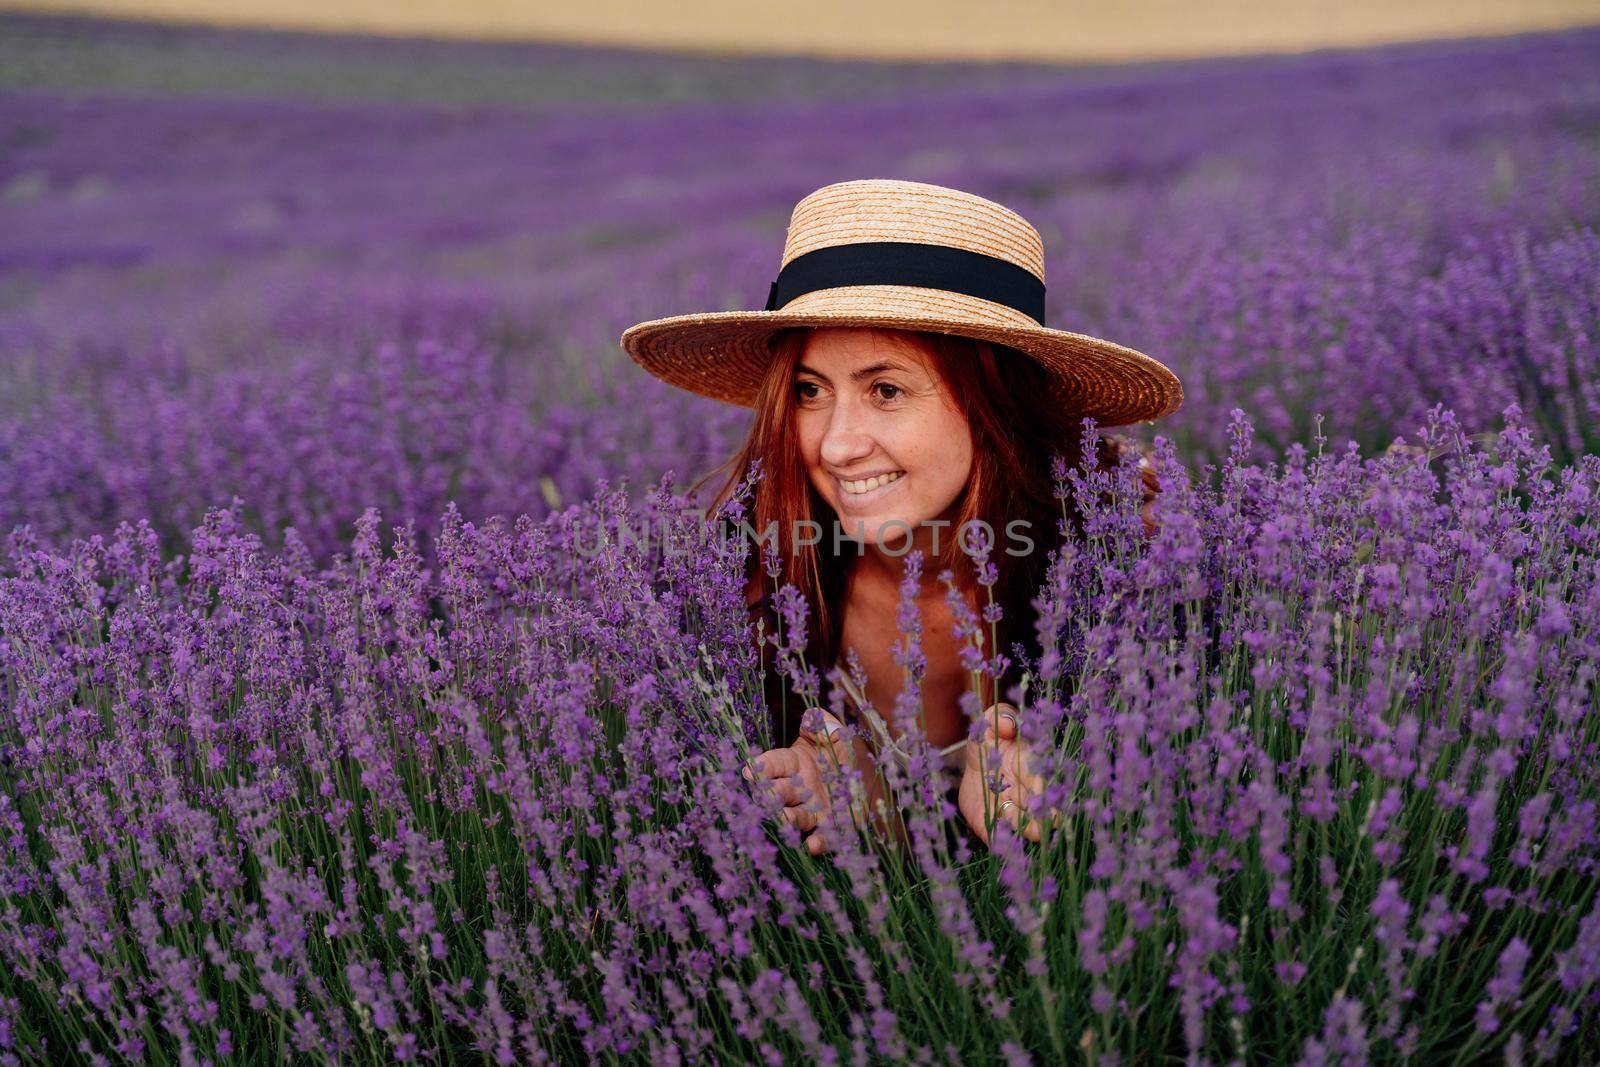 Close up portrait of a happy young woman in a dress on blooming fragrant lavender fields with endless rows. Bushes of lavender purple fragrant flowers on lavender fields